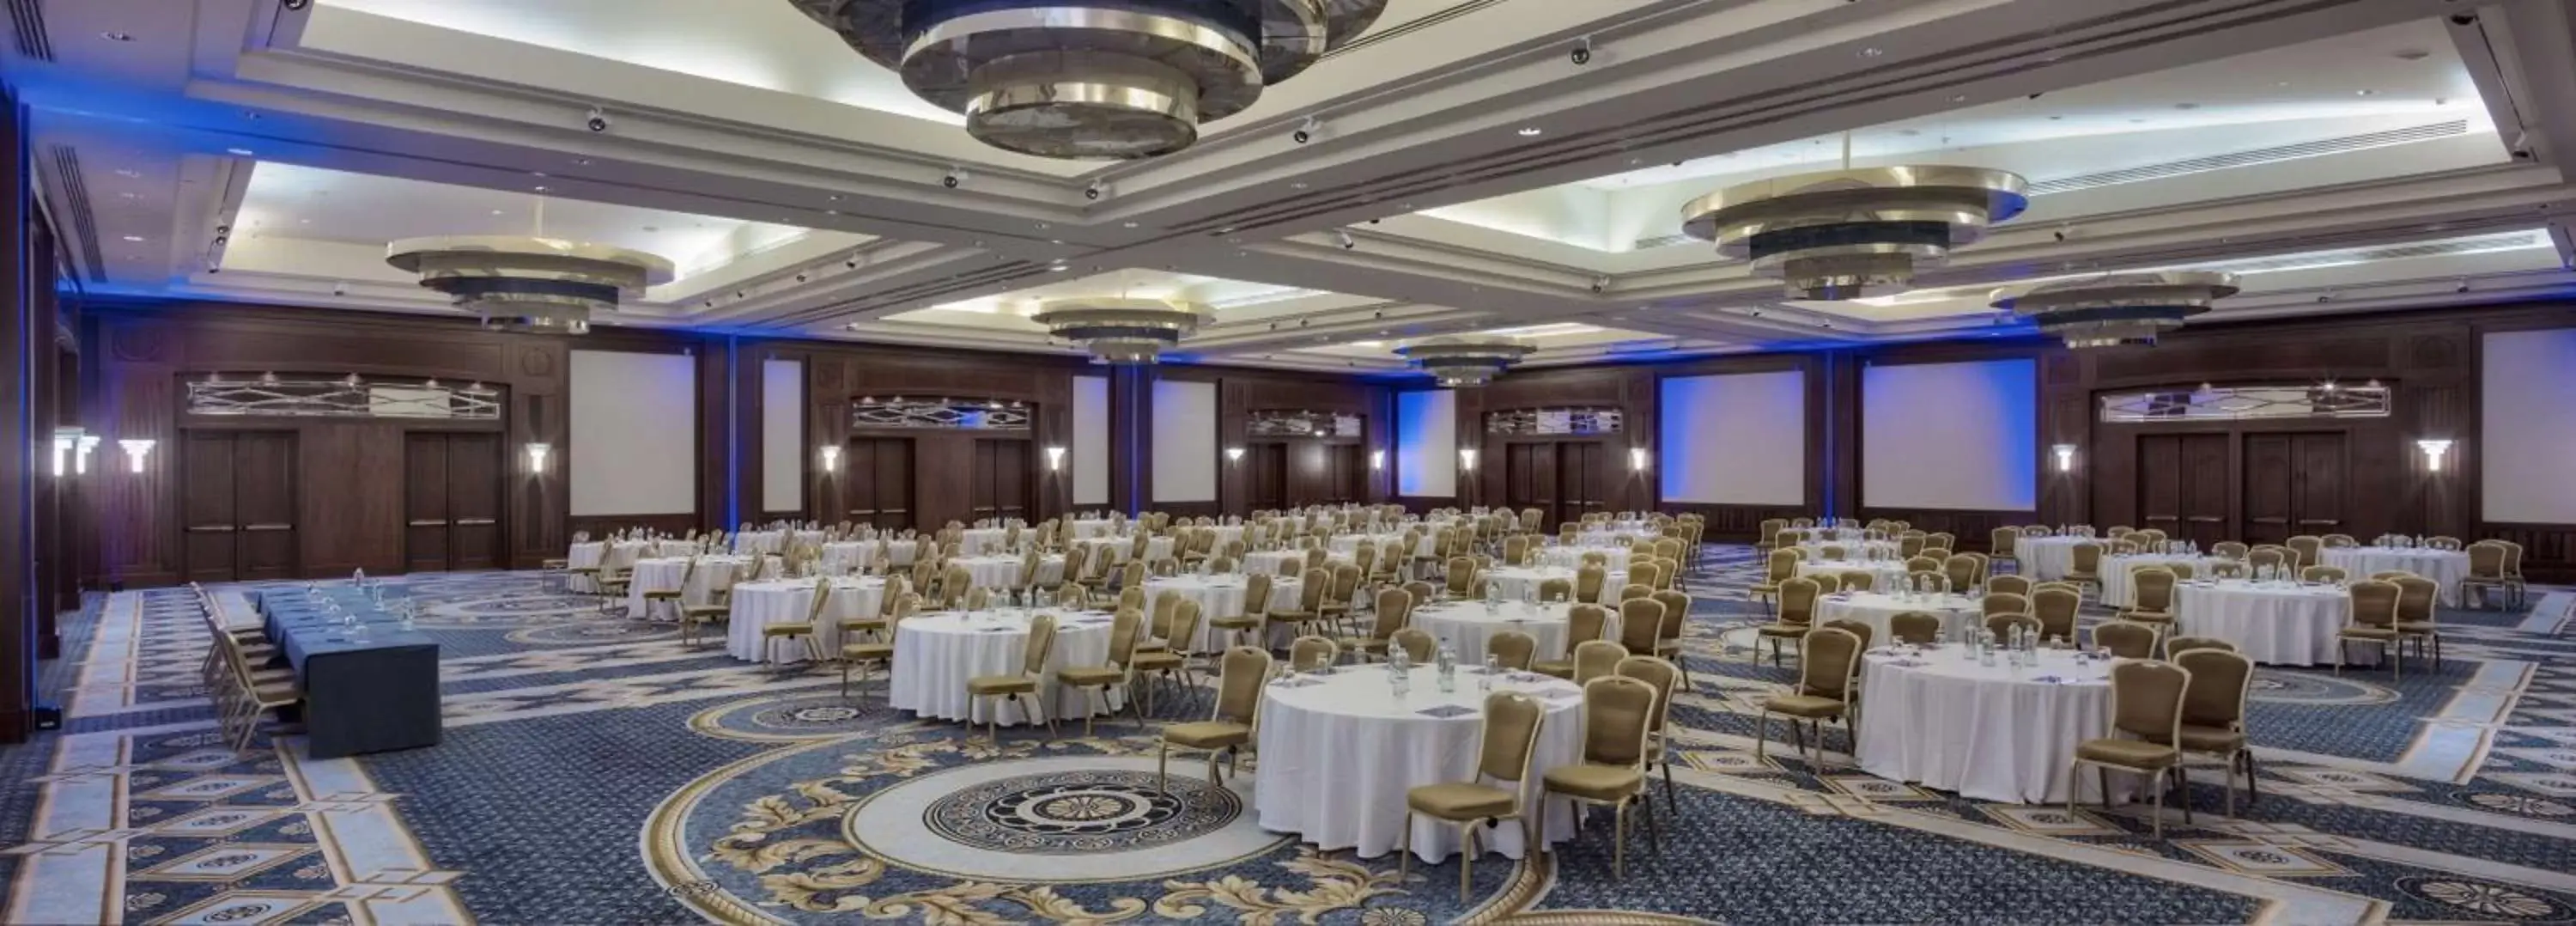 Meeting/conference room, Banquet Facilities in Hilton Molino Stucky Venice